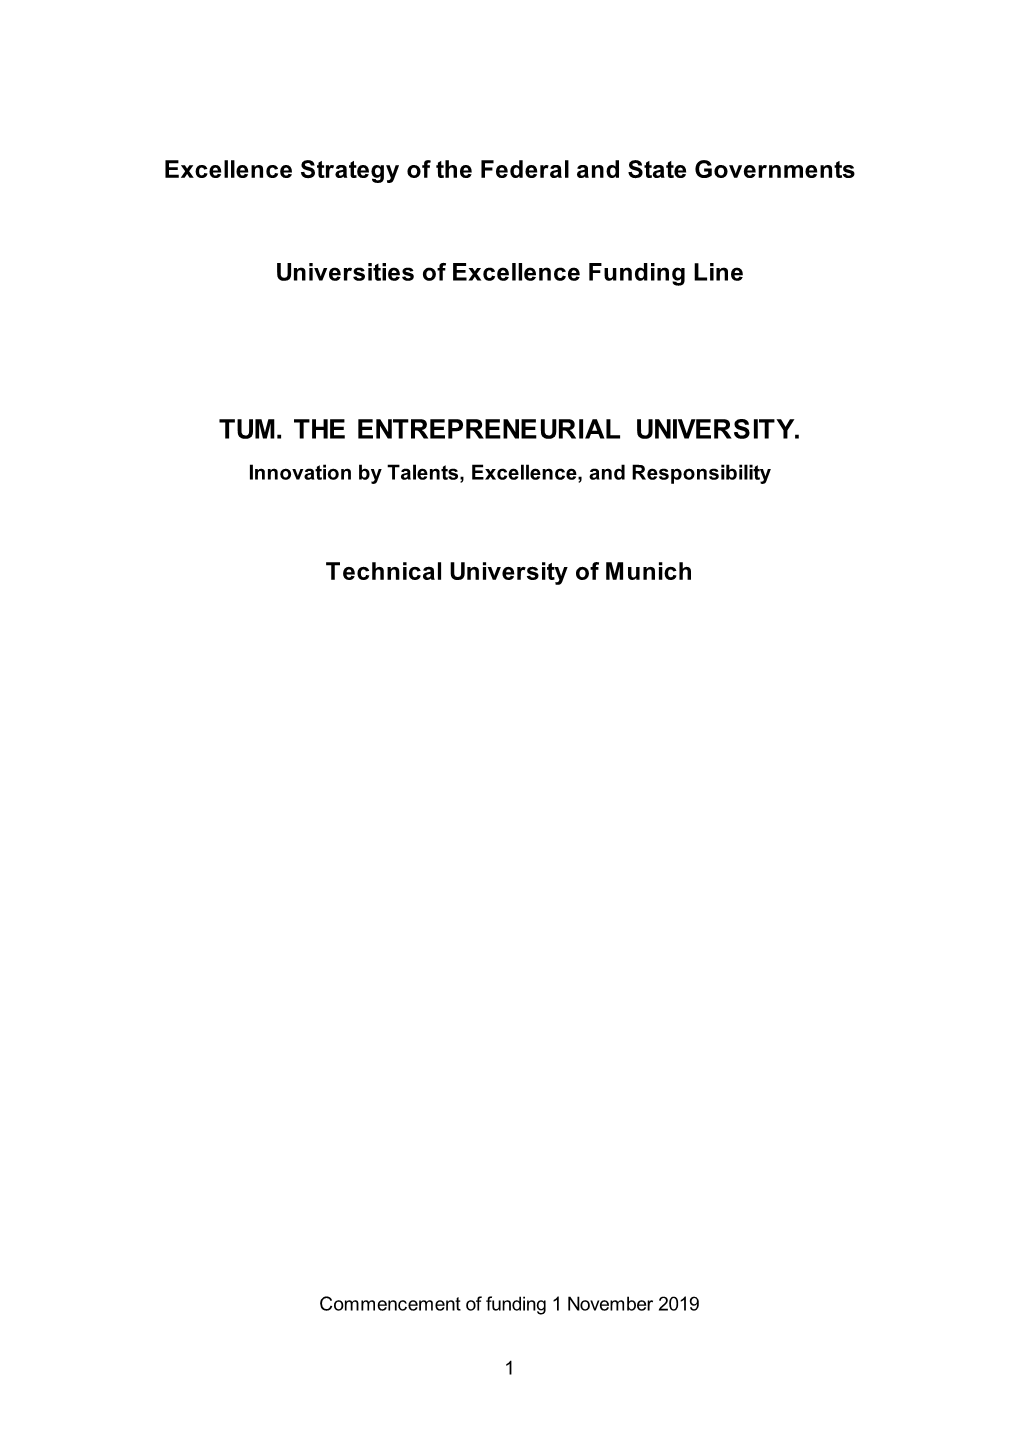 TUM. the ENTREPRENEURIAL UNIVERSITY. Innovation by Talents, Excellence, and Responsibility